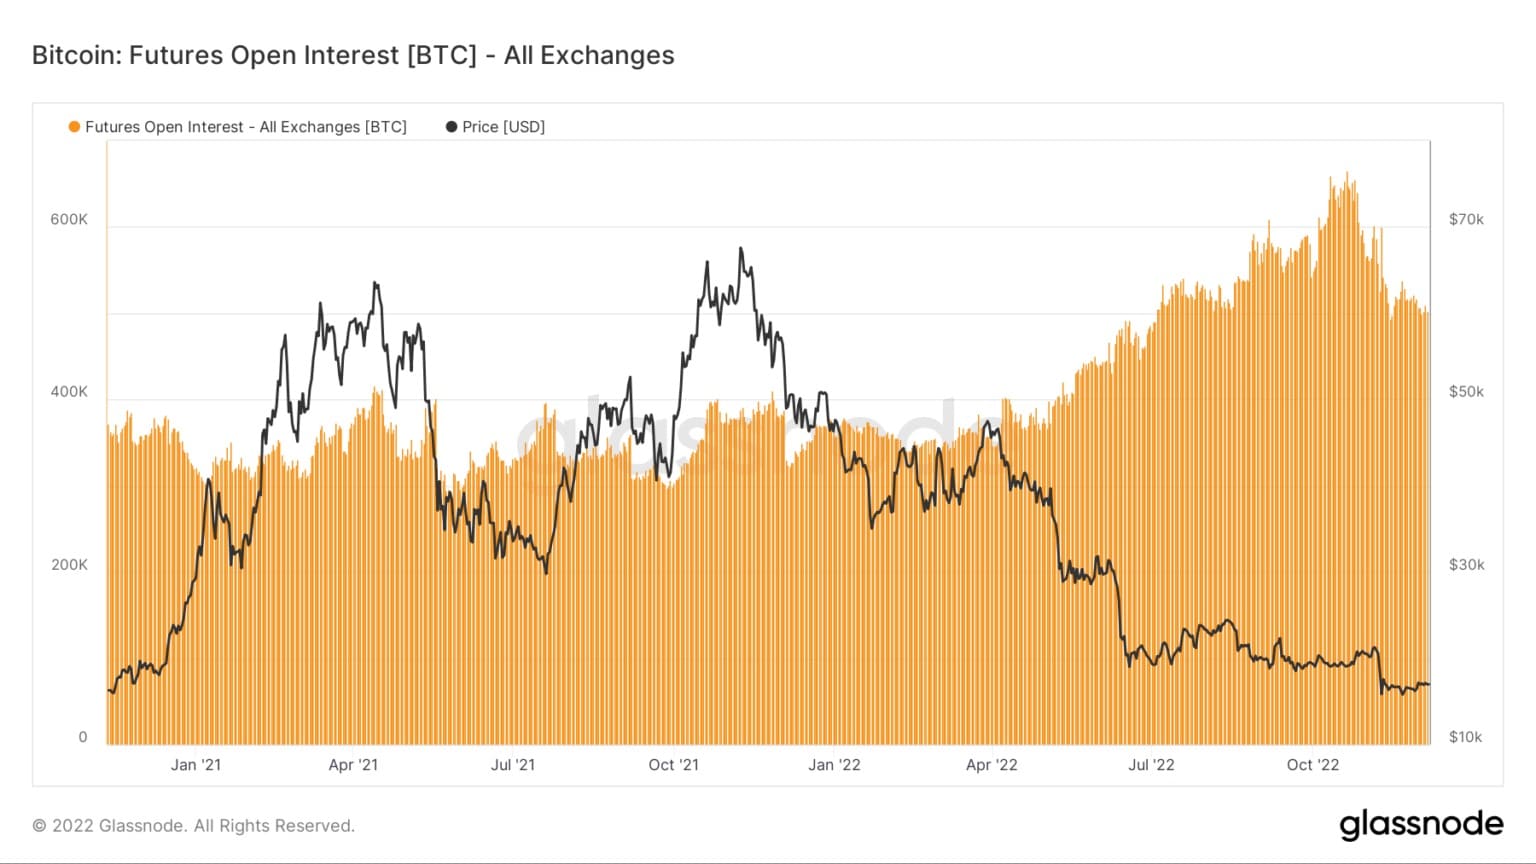 Graph showing the Bitcoin futures open interest (Source: Glassnode)